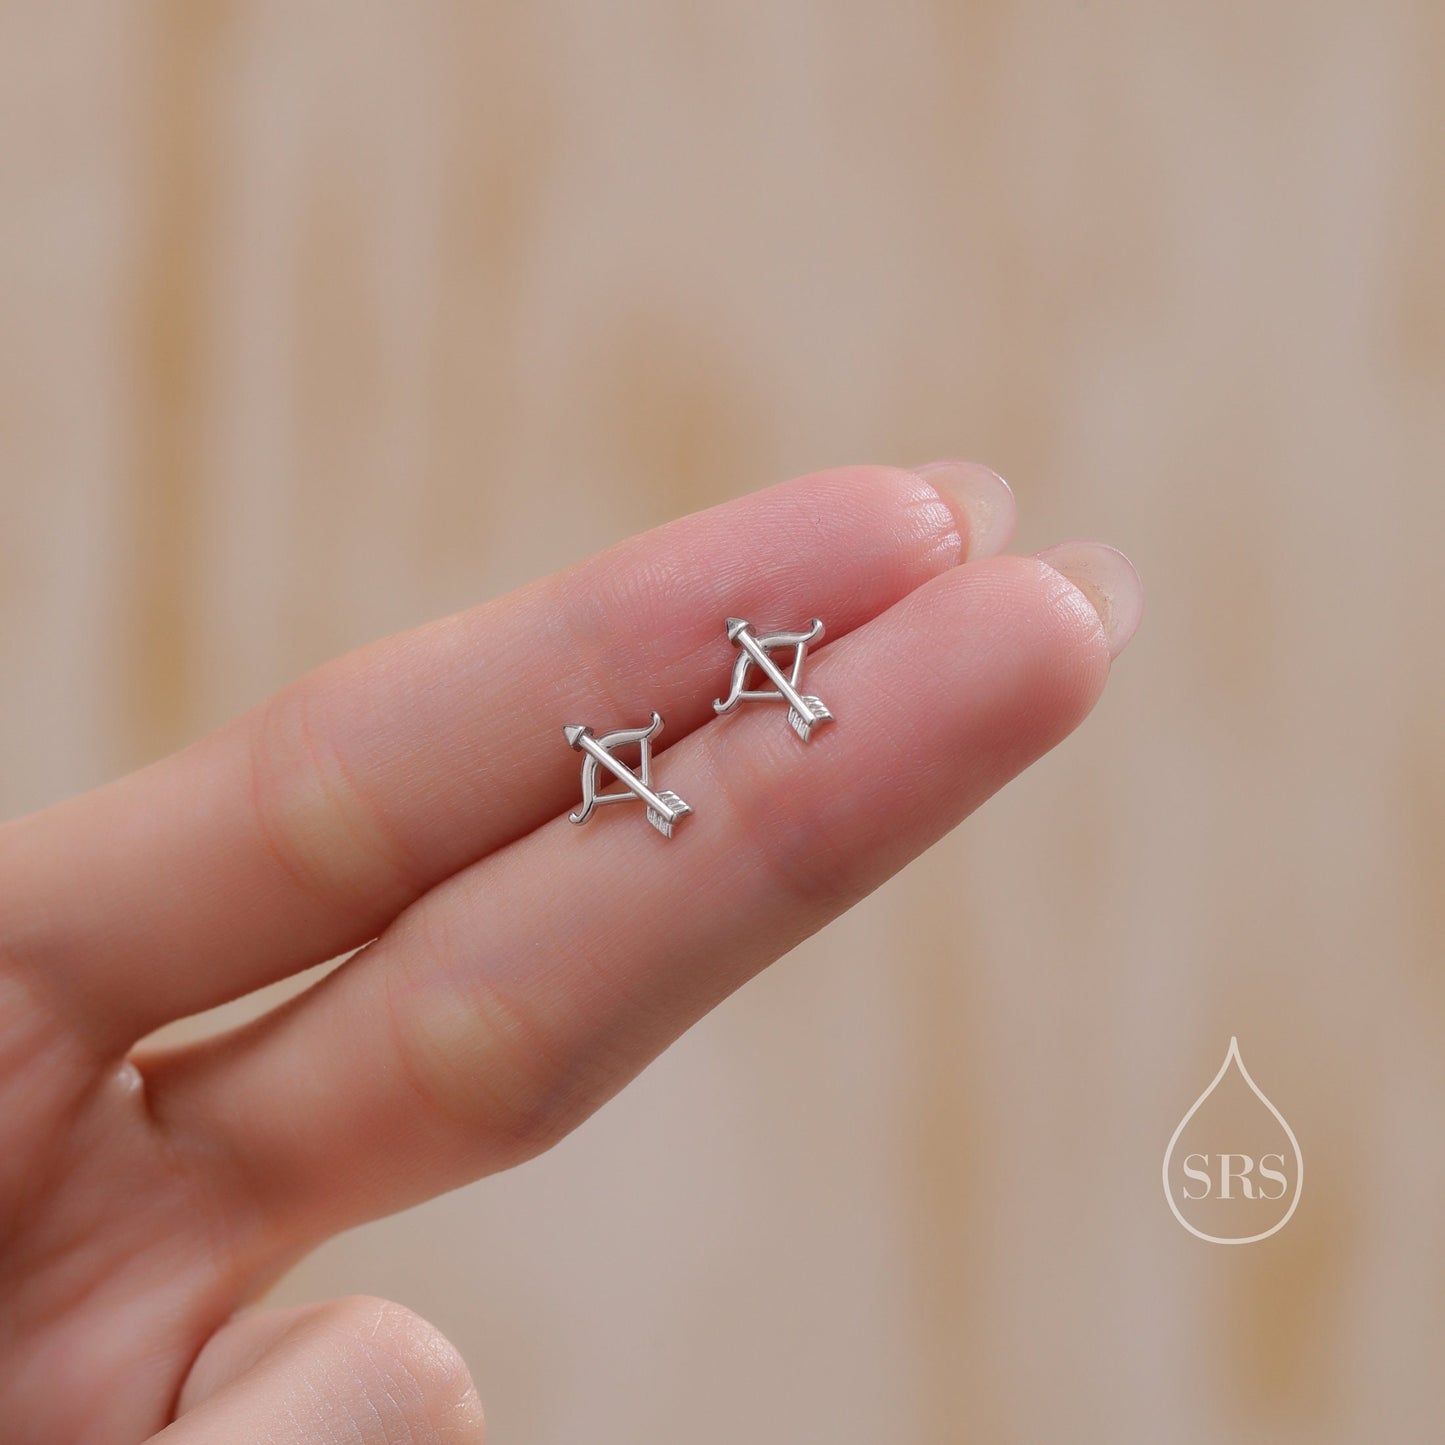 Bow and Arrow Stud Earrings in Sterling Silver, Silver or Gold or Rose Gold, Bow and Arrow Earrings